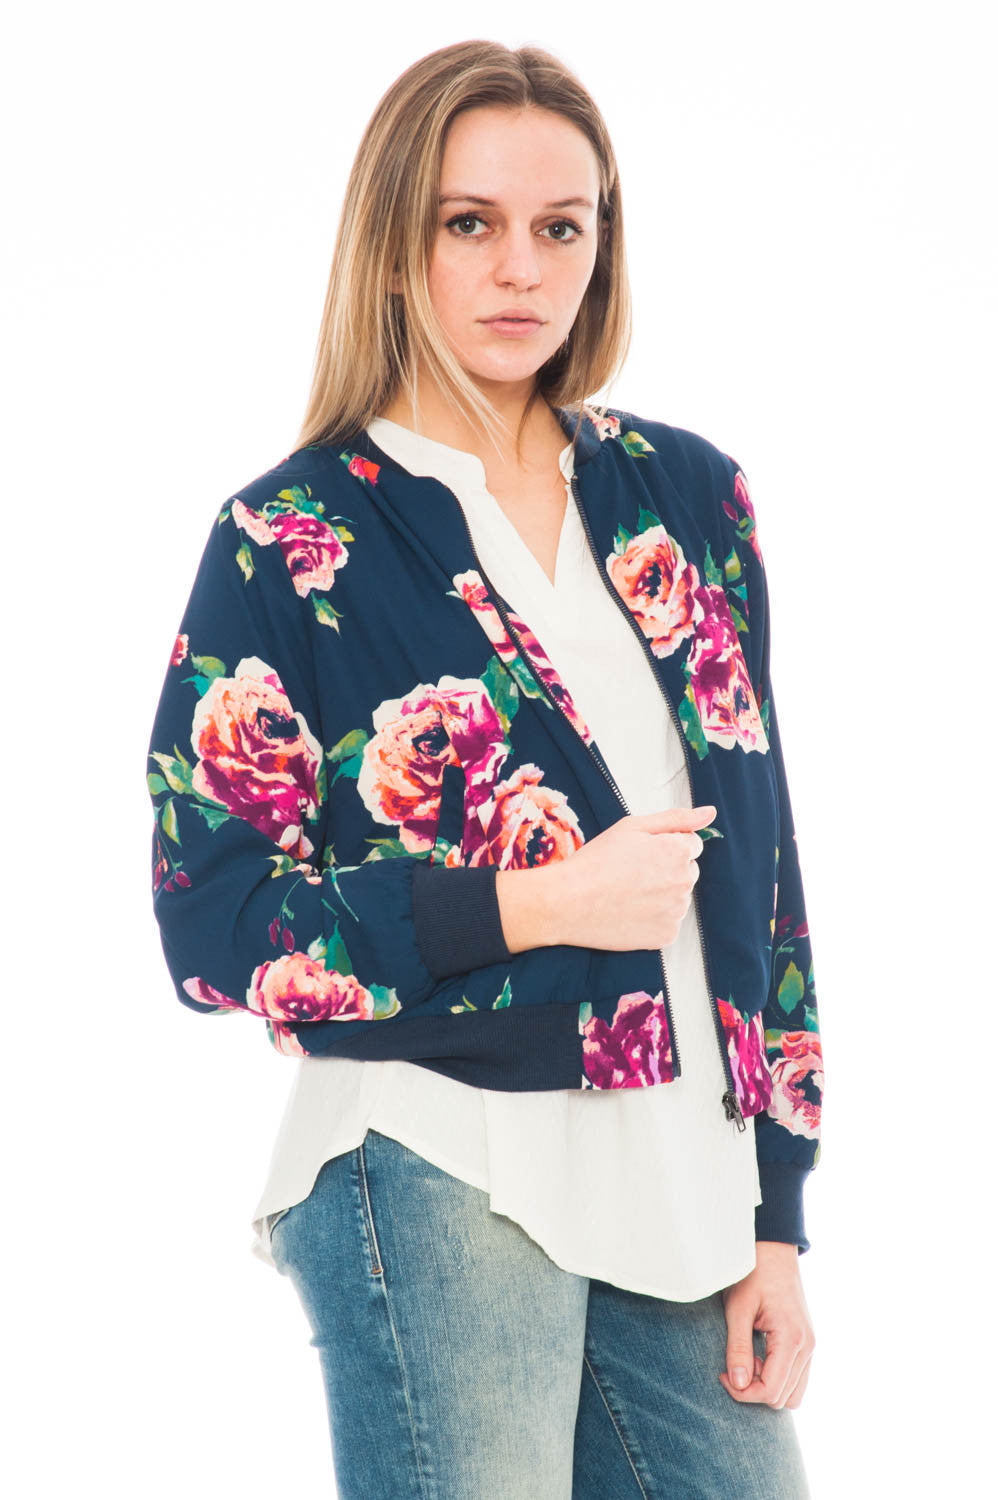 Jacket - Floral Bomber zip up by Everly